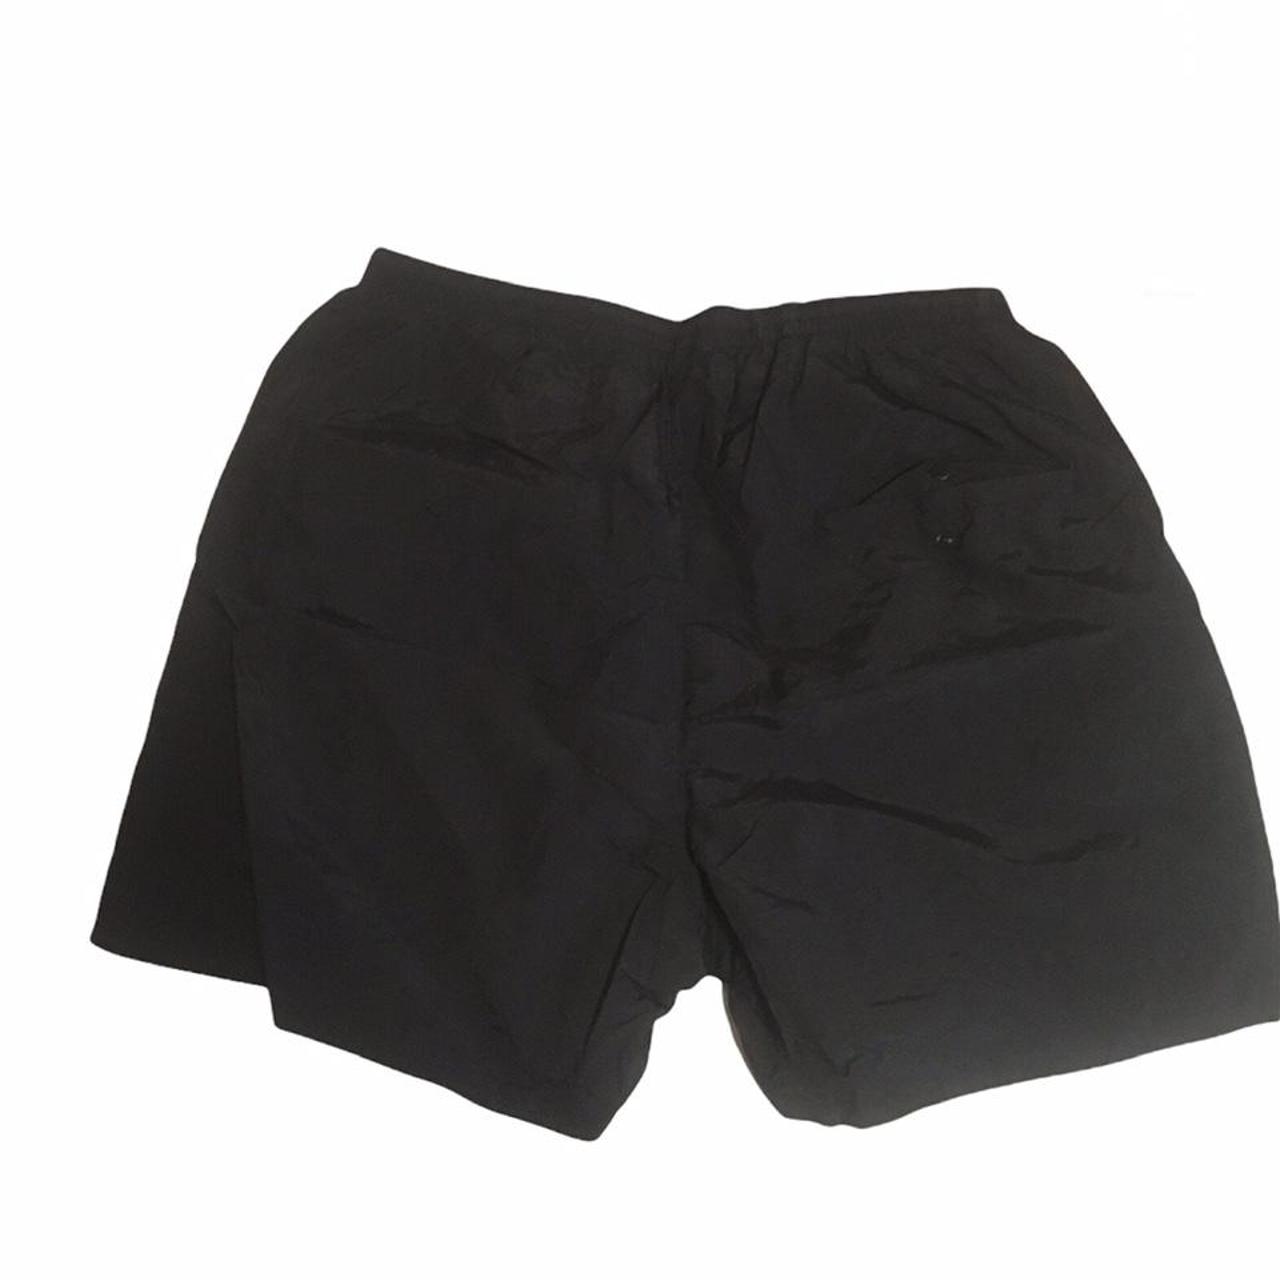 Product Image 2 - Black Patagonia Shorts with small